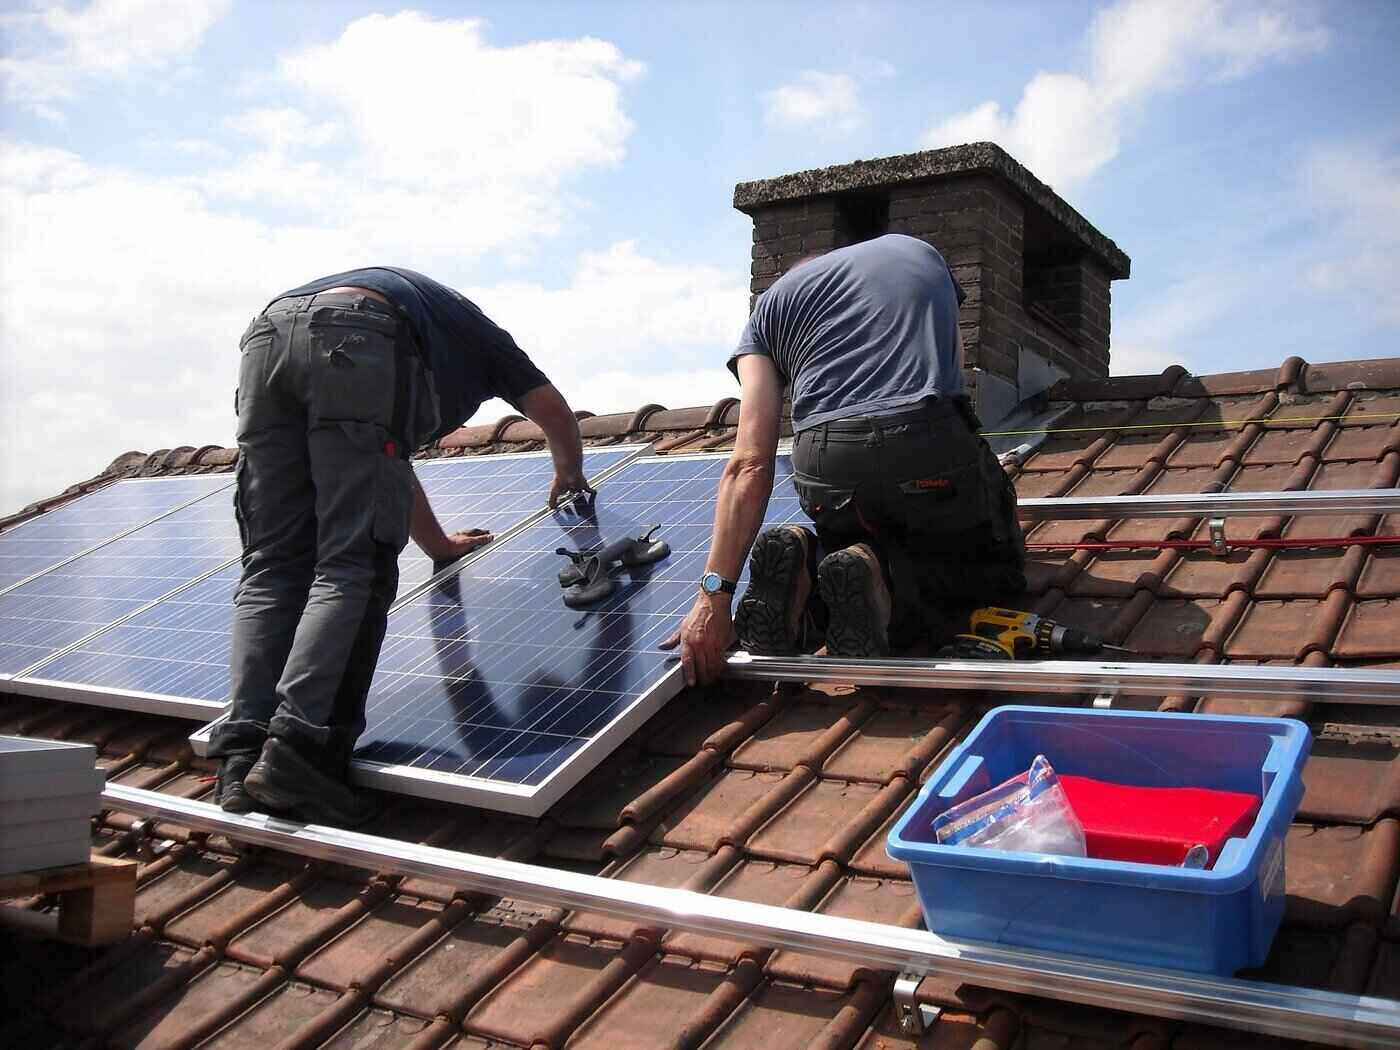 two men installing solar panels on roof - what equipment do you need to diy a solar system